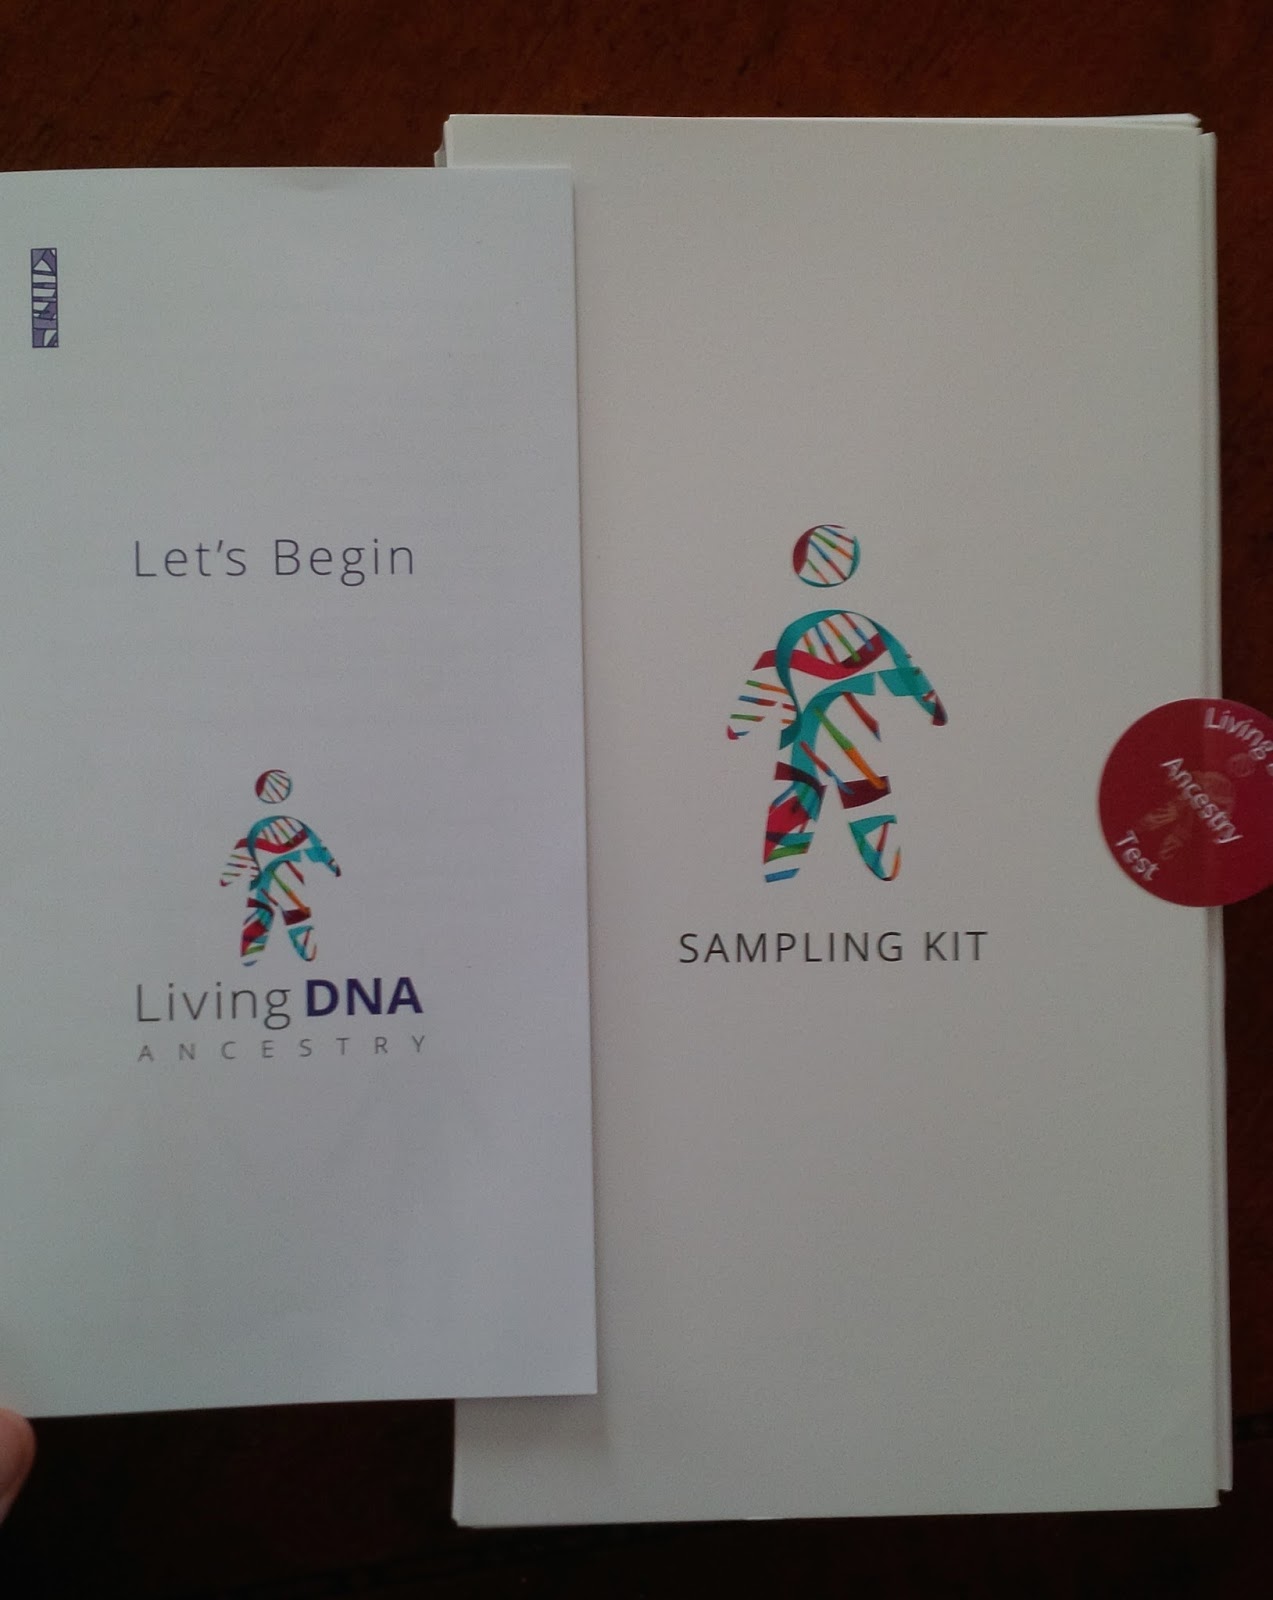 Living DNA Review - The Ancestry DNA Test You Can Take at Home, AD